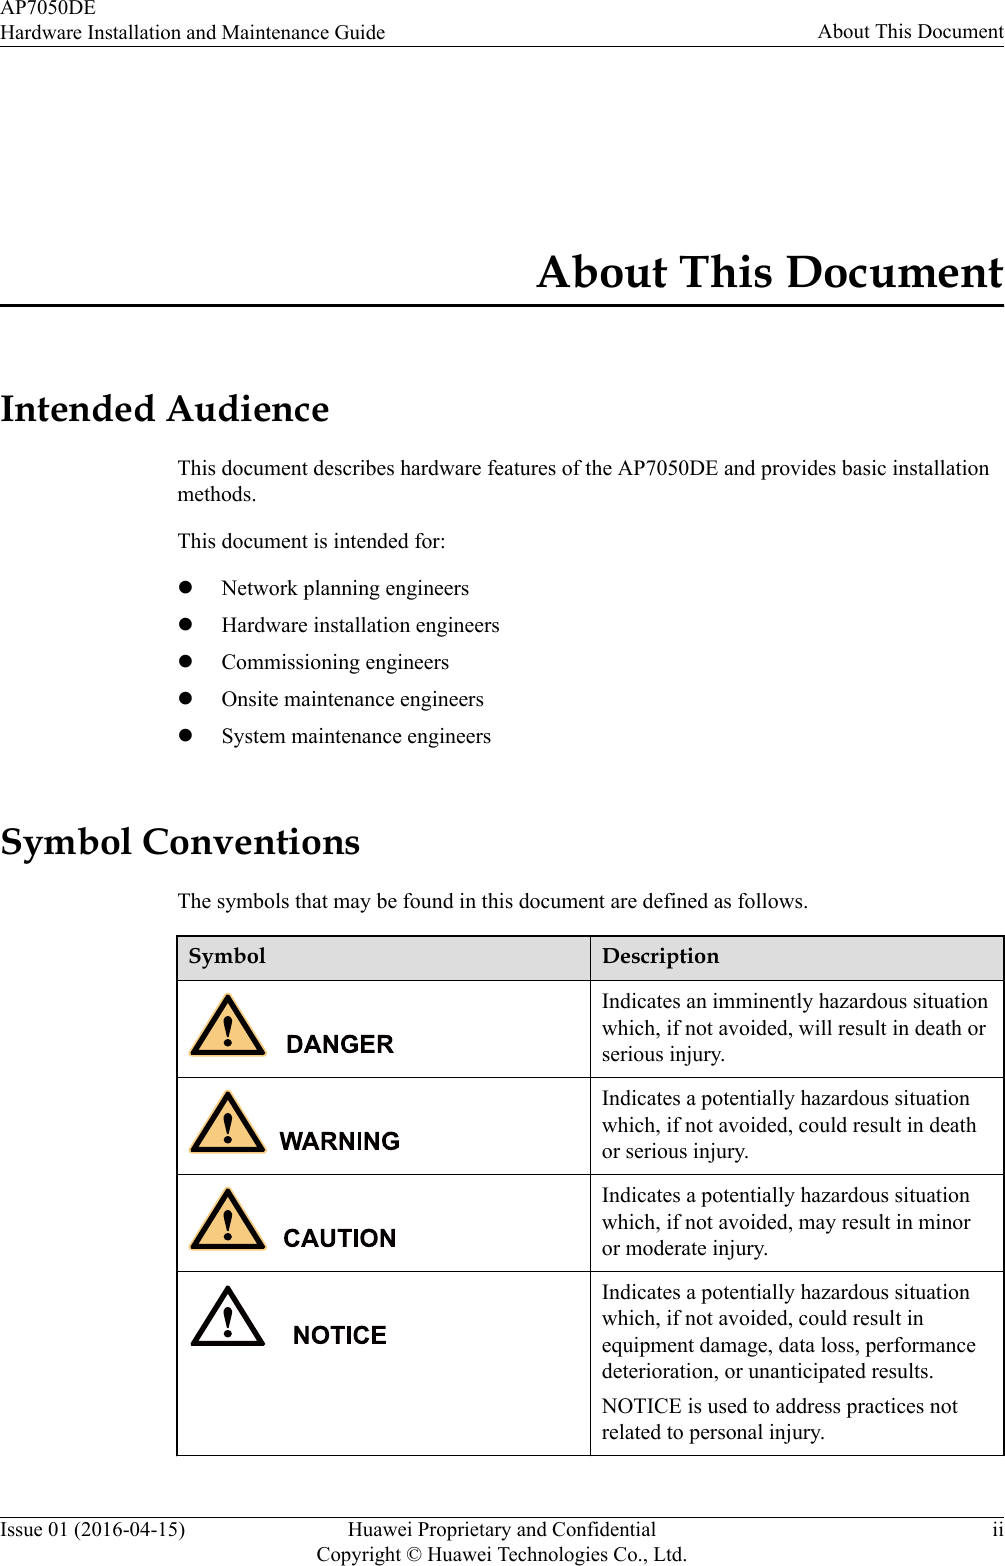 About This DocumentIntended AudienceThis document describes hardware features of the AP7050DE and provides basic installationmethods.This document is intended for:lNetwork planning engineerslHardware installation engineerslCommissioning engineerslOnsite maintenance engineerslSystem maintenance engineersSymbol ConventionsThe symbols that may be found in this document are defined as follows.Symbol DescriptionIndicates an imminently hazardous situationwhich, if not avoided, will result in death orserious injury.Indicates a potentially hazardous situationwhich, if not avoided, could result in deathor serious injury.Indicates a potentially hazardous situationwhich, if not avoided, may result in minoror moderate injury.Indicates a potentially hazardous situationwhich, if not avoided, could result inequipment damage, data loss, performancedeterioration, or unanticipated results.NOTICE is used to address practices notrelated to personal injury.AP7050DEHardware Installation and Maintenance Guide About This DocumentIssue 01 (2016-04-15) Huawei Proprietary and ConfidentialCopyright © Huawei Technologies Co., Ltd.ii